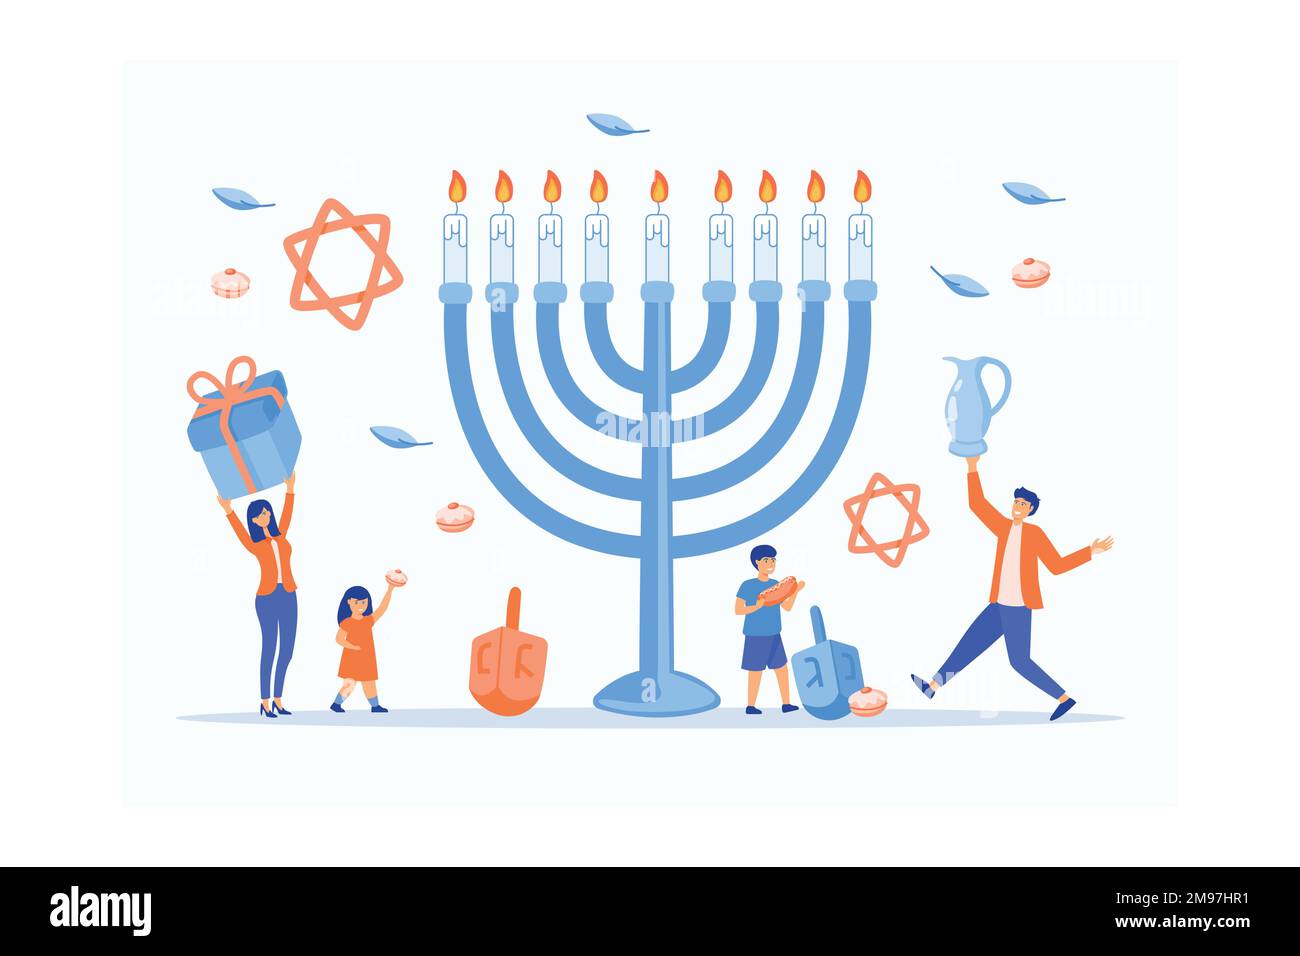 Happy Hanukkah, Jewish Festival of Lights scene with people, happy families with children, flat vector modern illustration Stock Vector